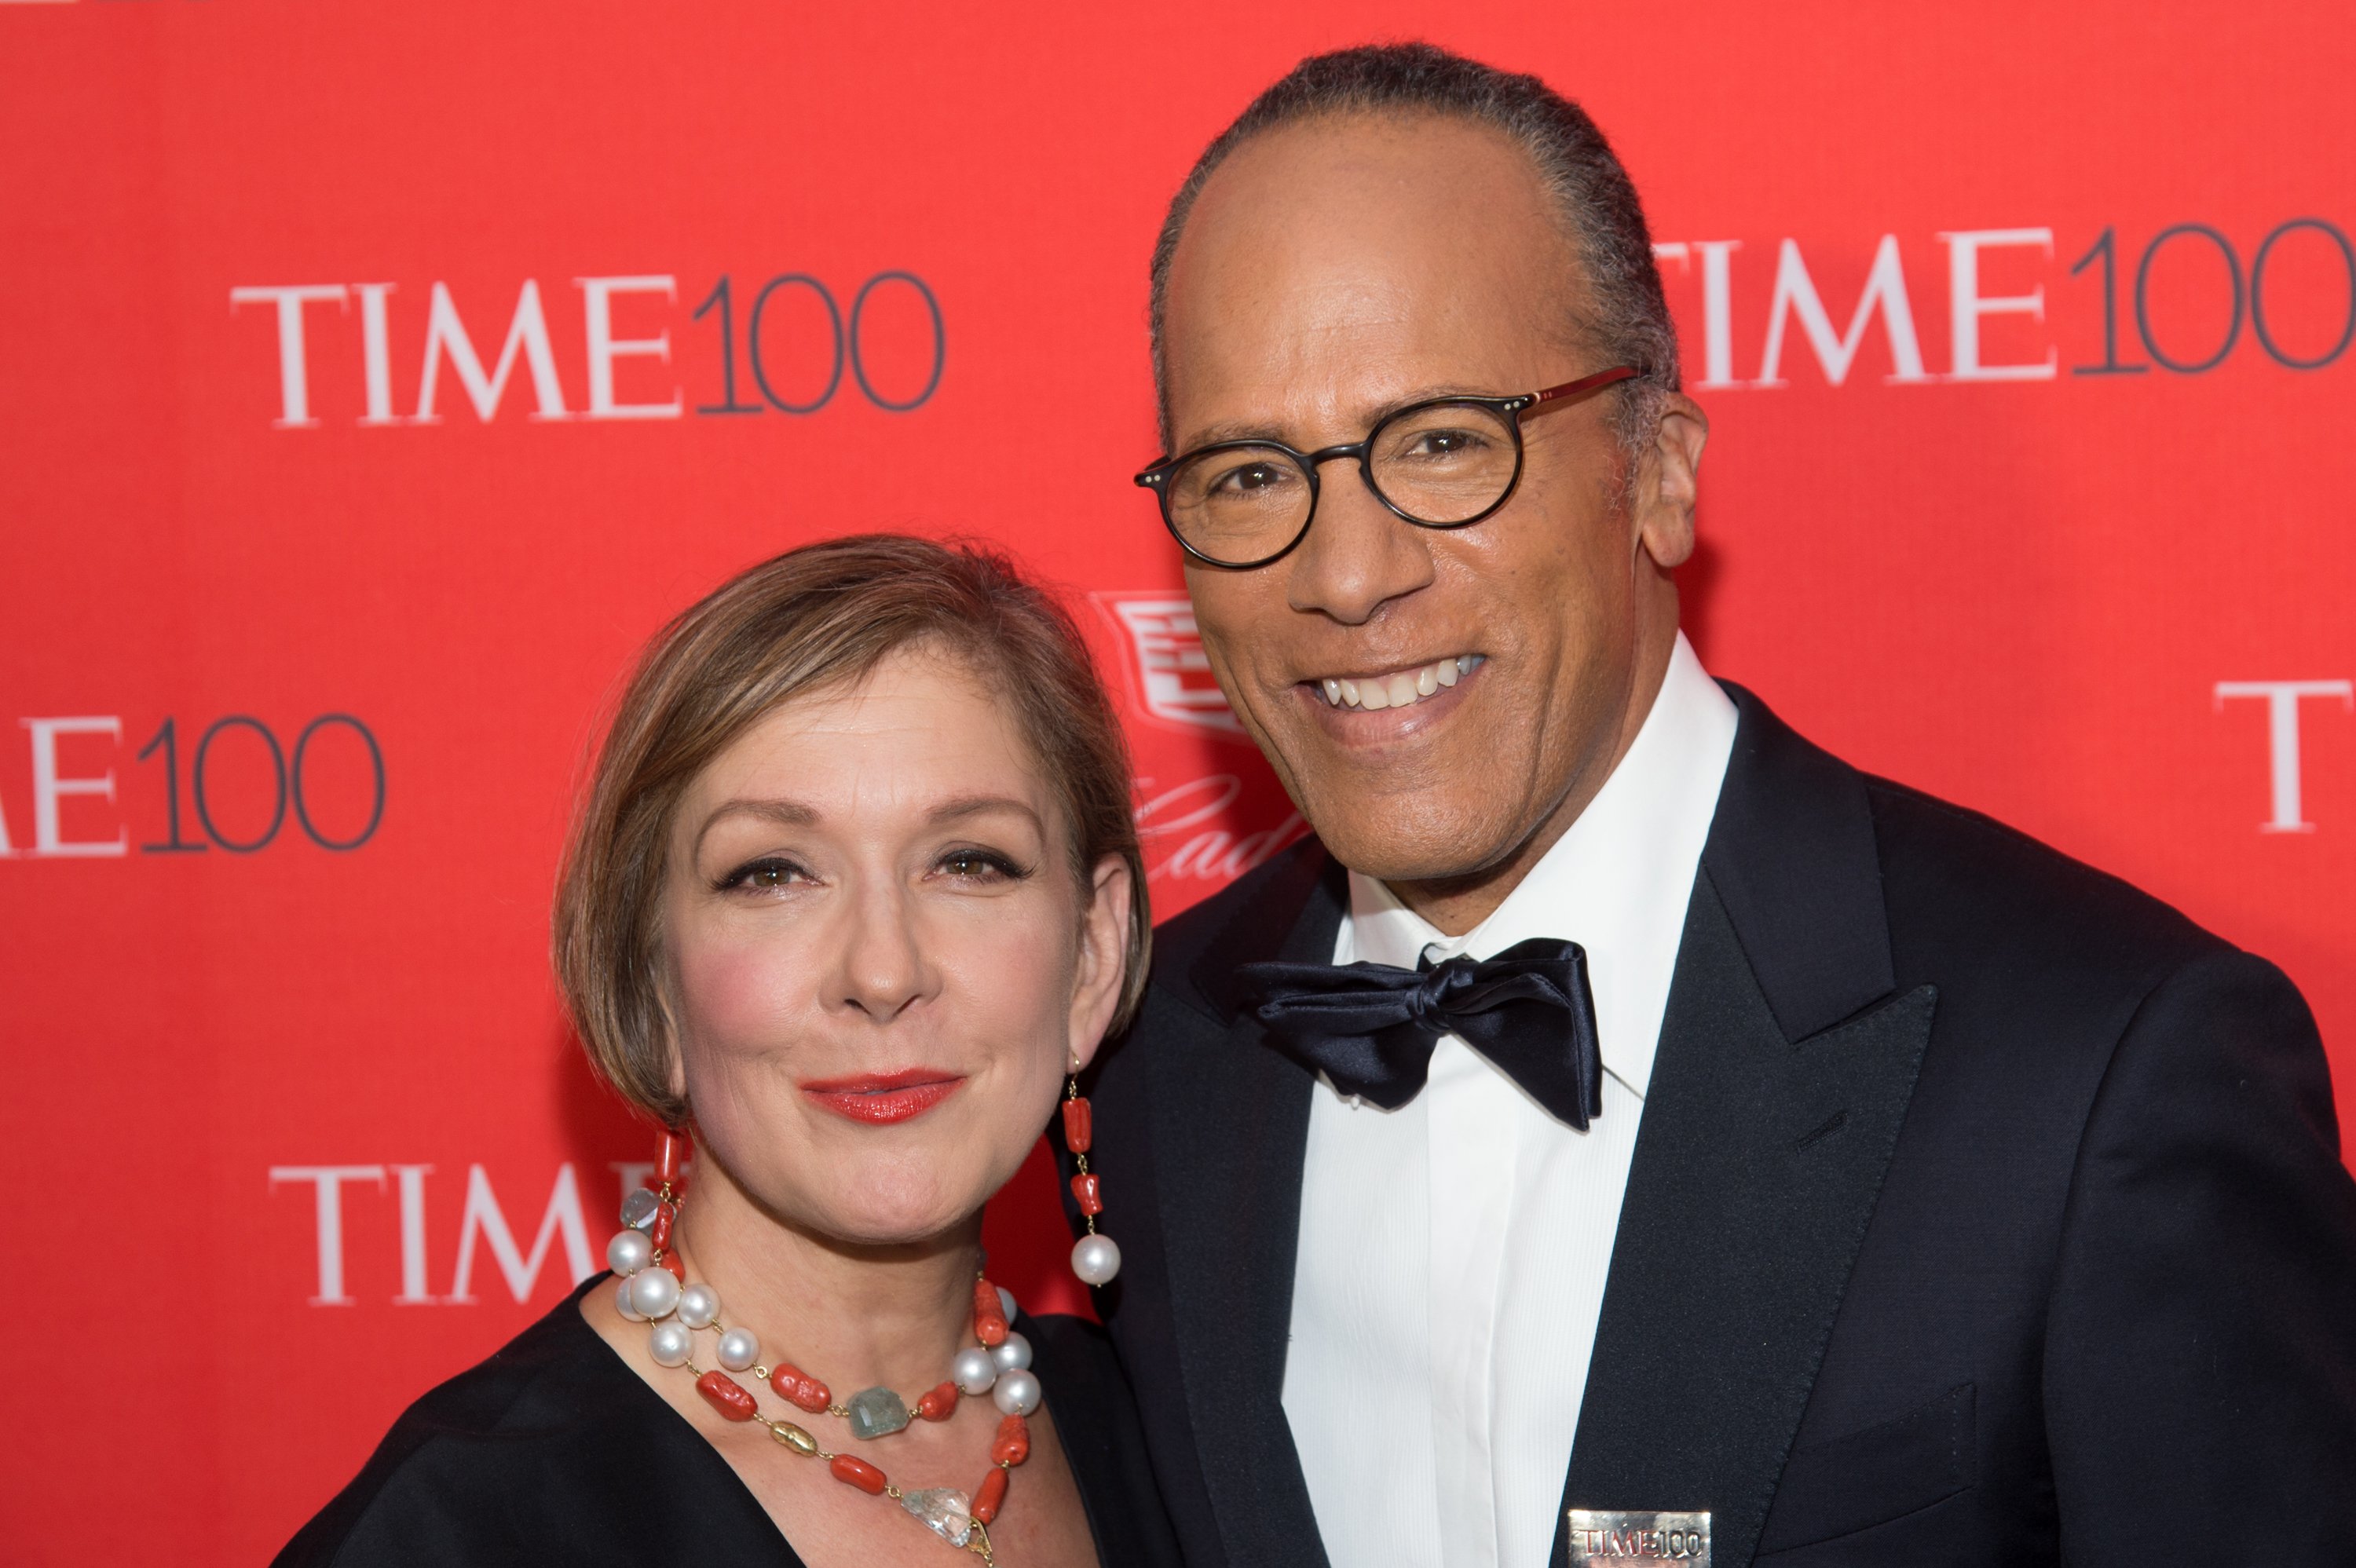 Carol Hagen-Holt and Lester Holt at the 2016 Time 100 Gala at Frederick P. Rose Hall, Jazz at Lincoln Center on April 26, 2016 in New York City | Source: Getty Images